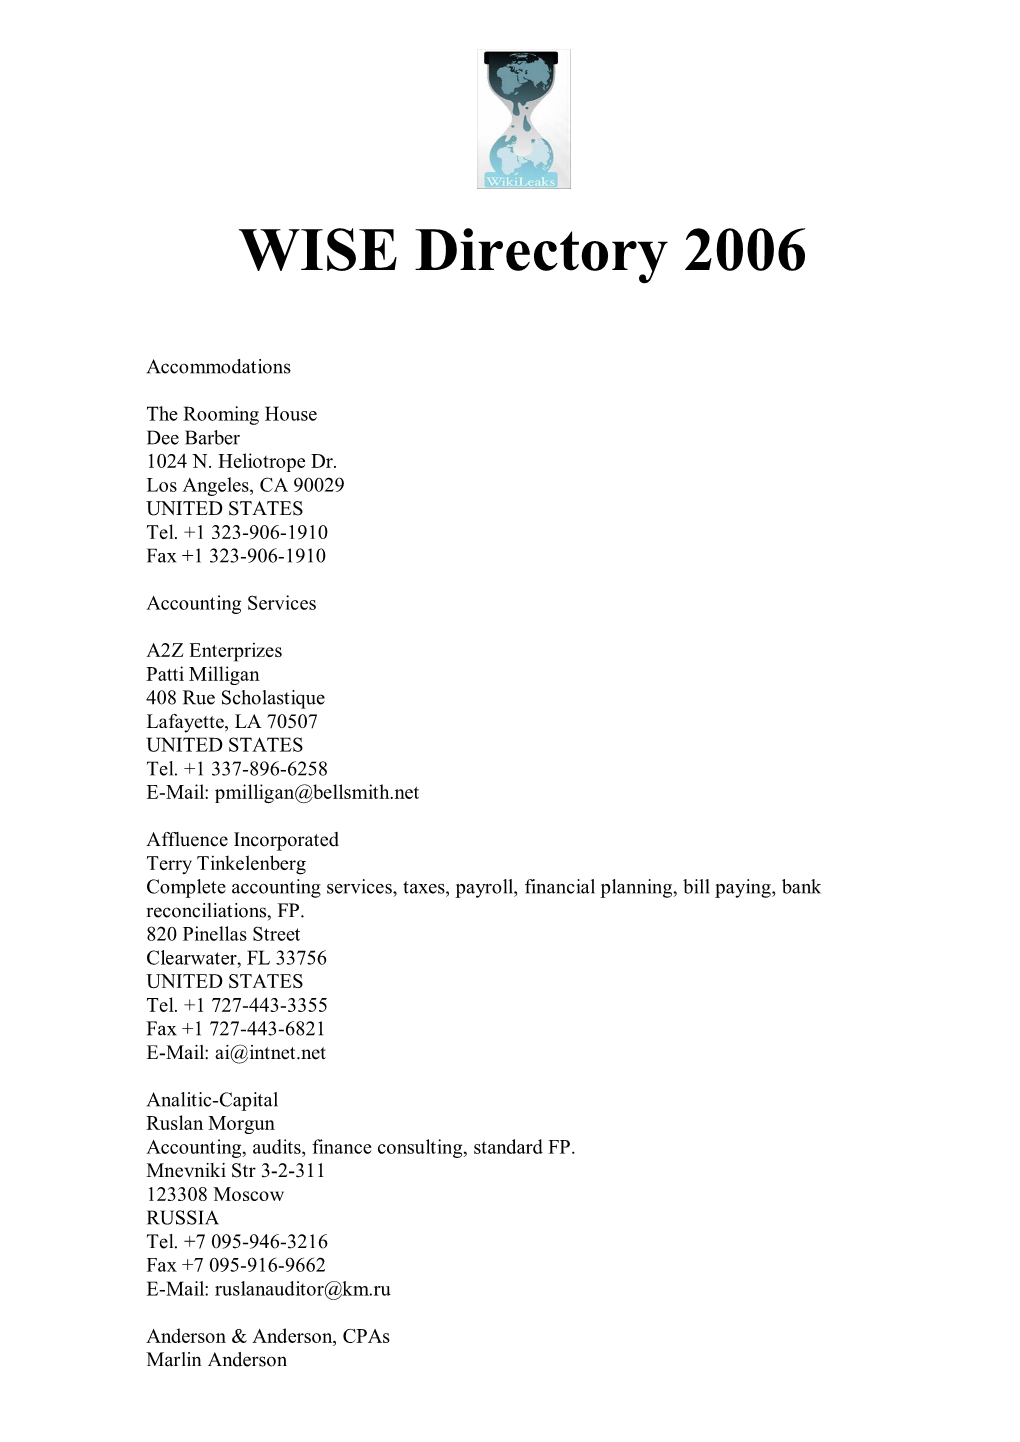 WISE Directory 2006